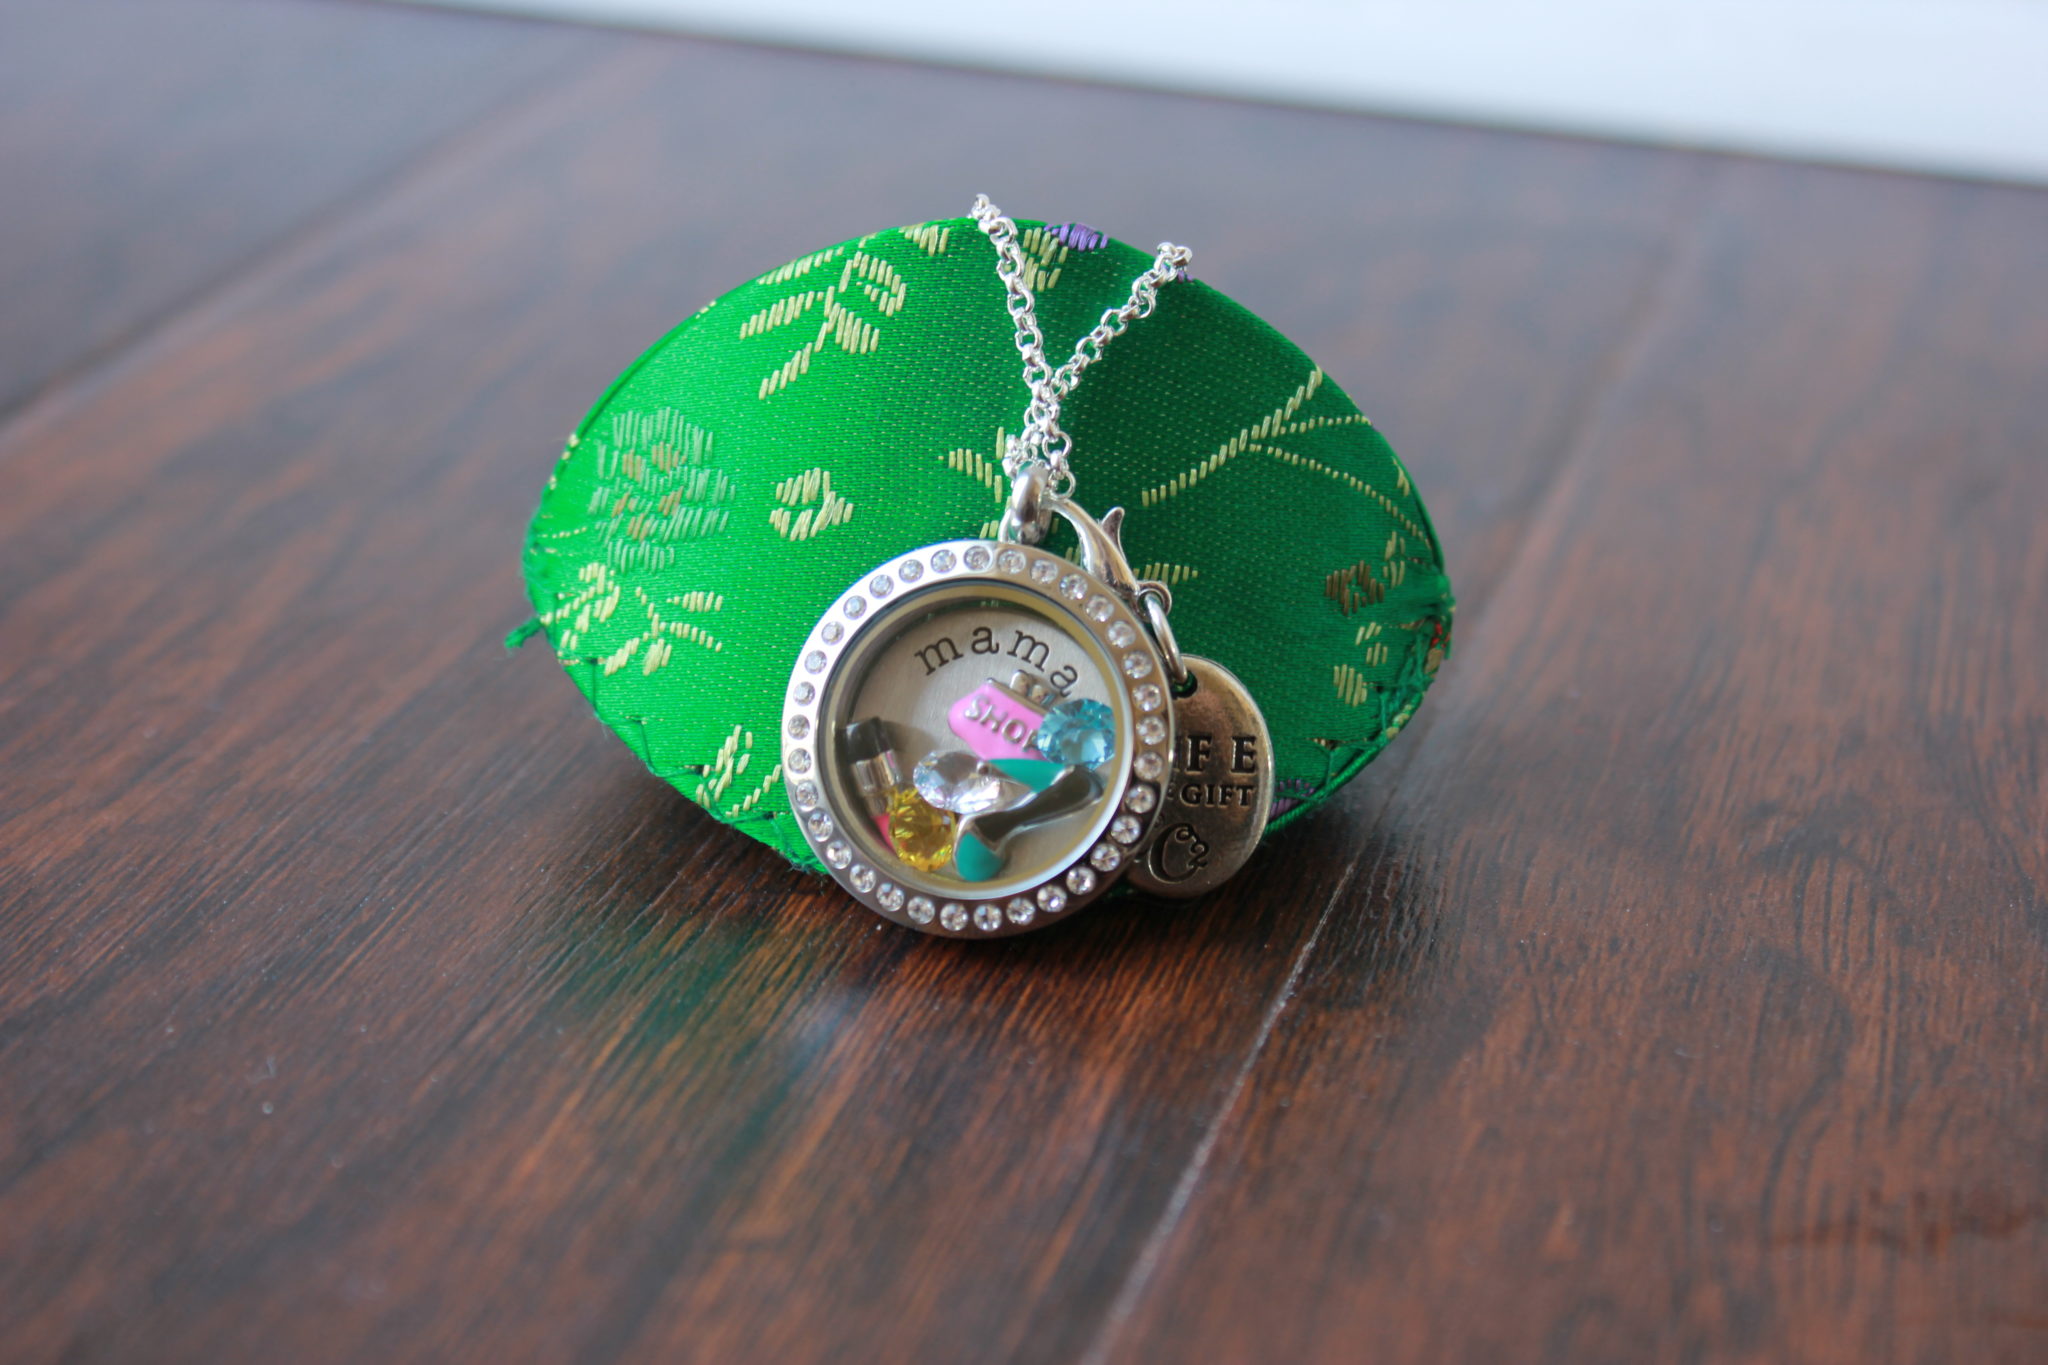 Origami Owl review and giveaway